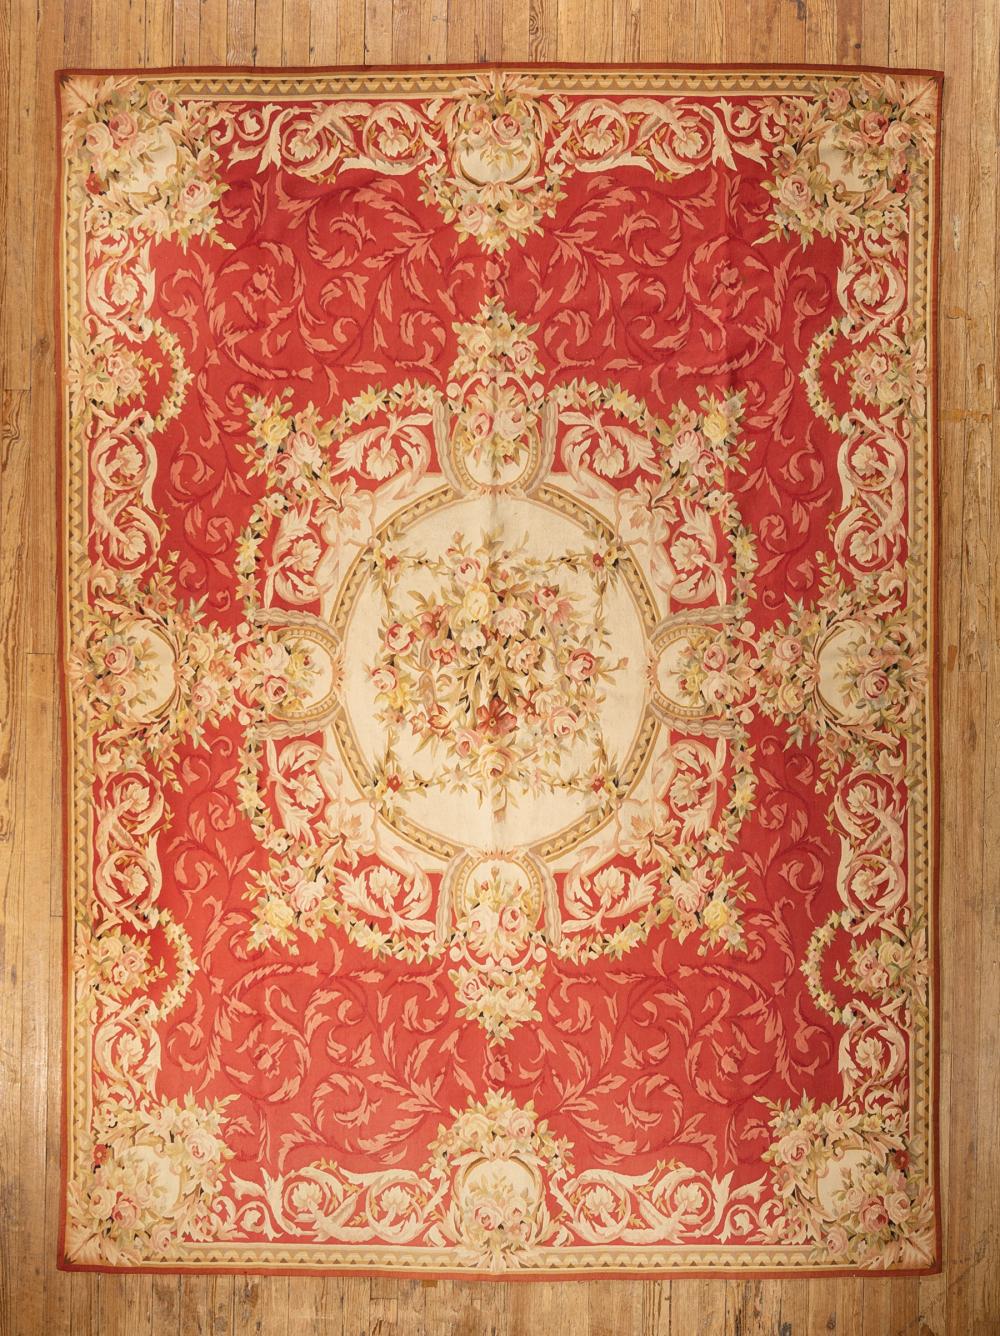 FRENCH AUBUSSON STYLE CARPETFrench 31c894